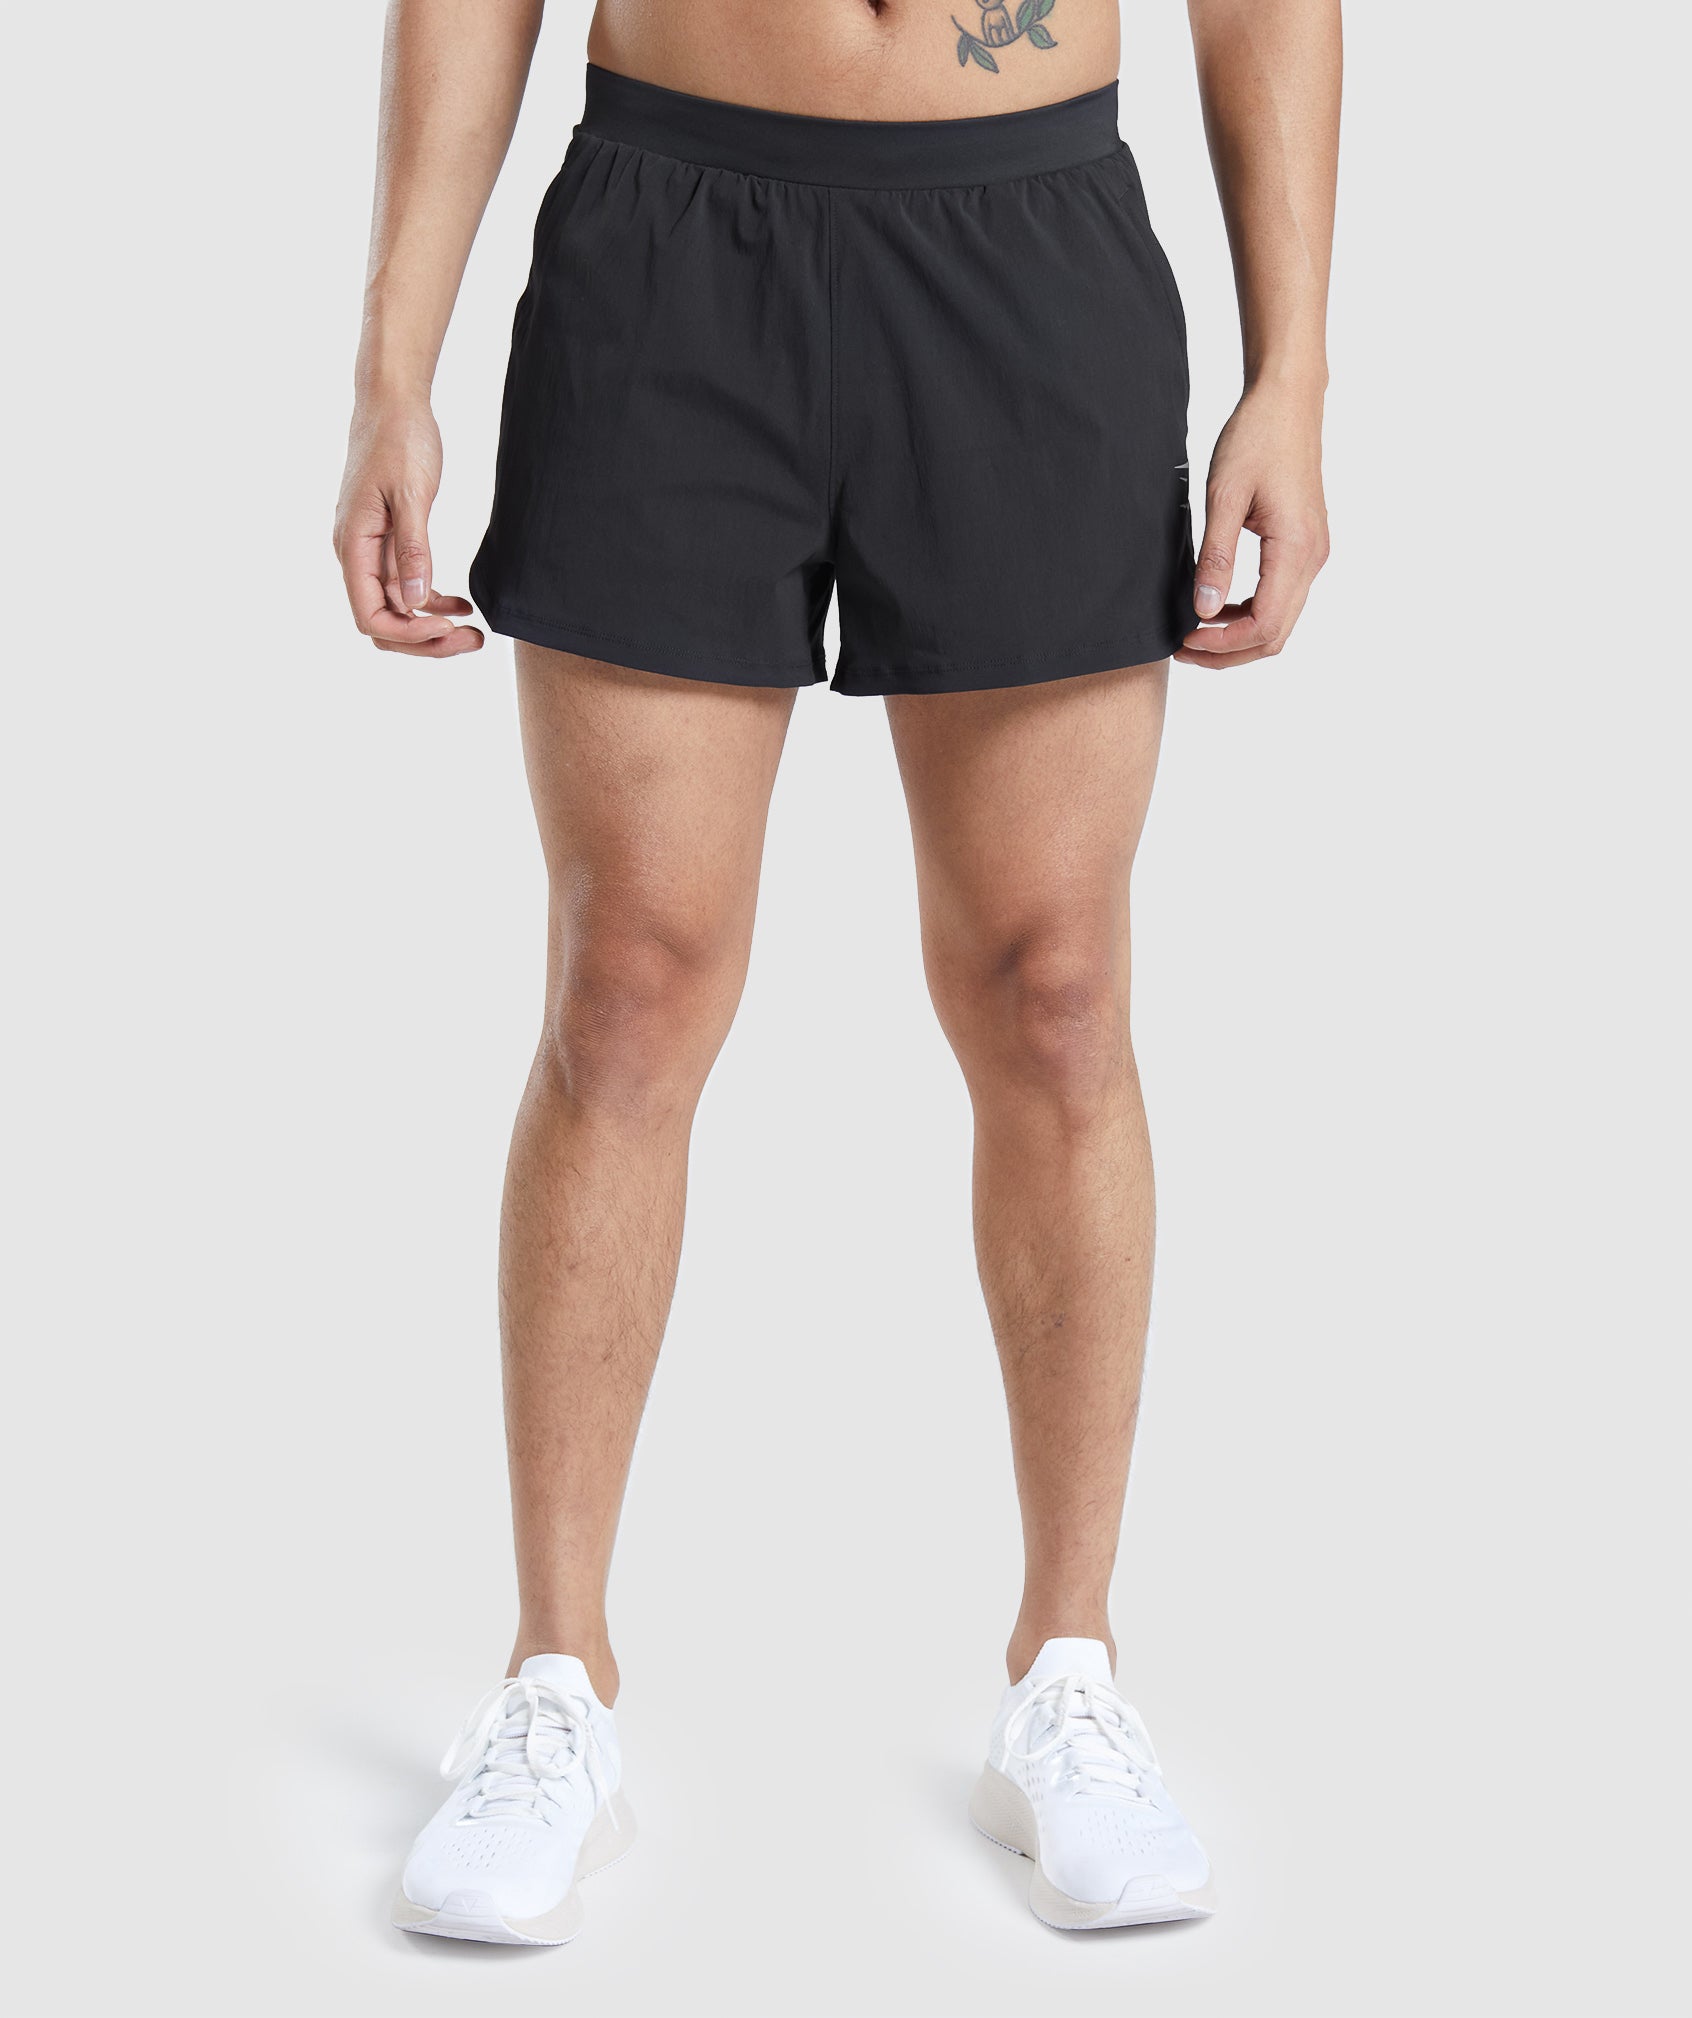 Speed Evolve 3" 2 In 1 Shorts in Black - view 2